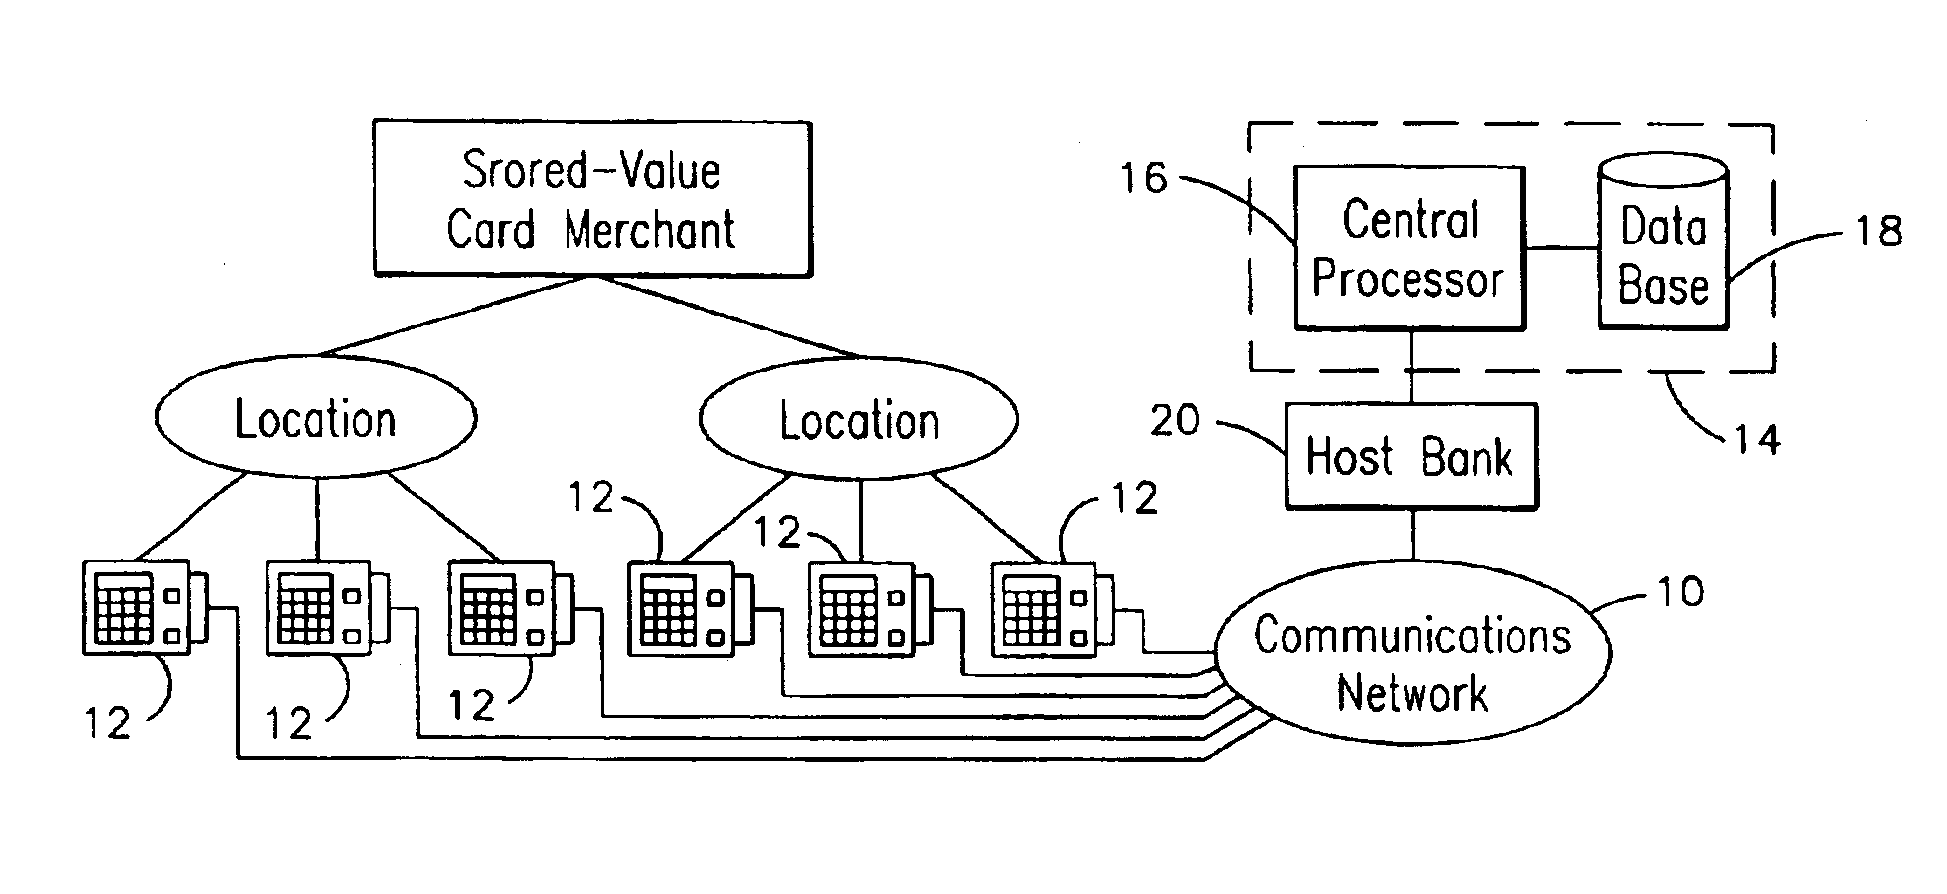 System and method for managing stored-value card data